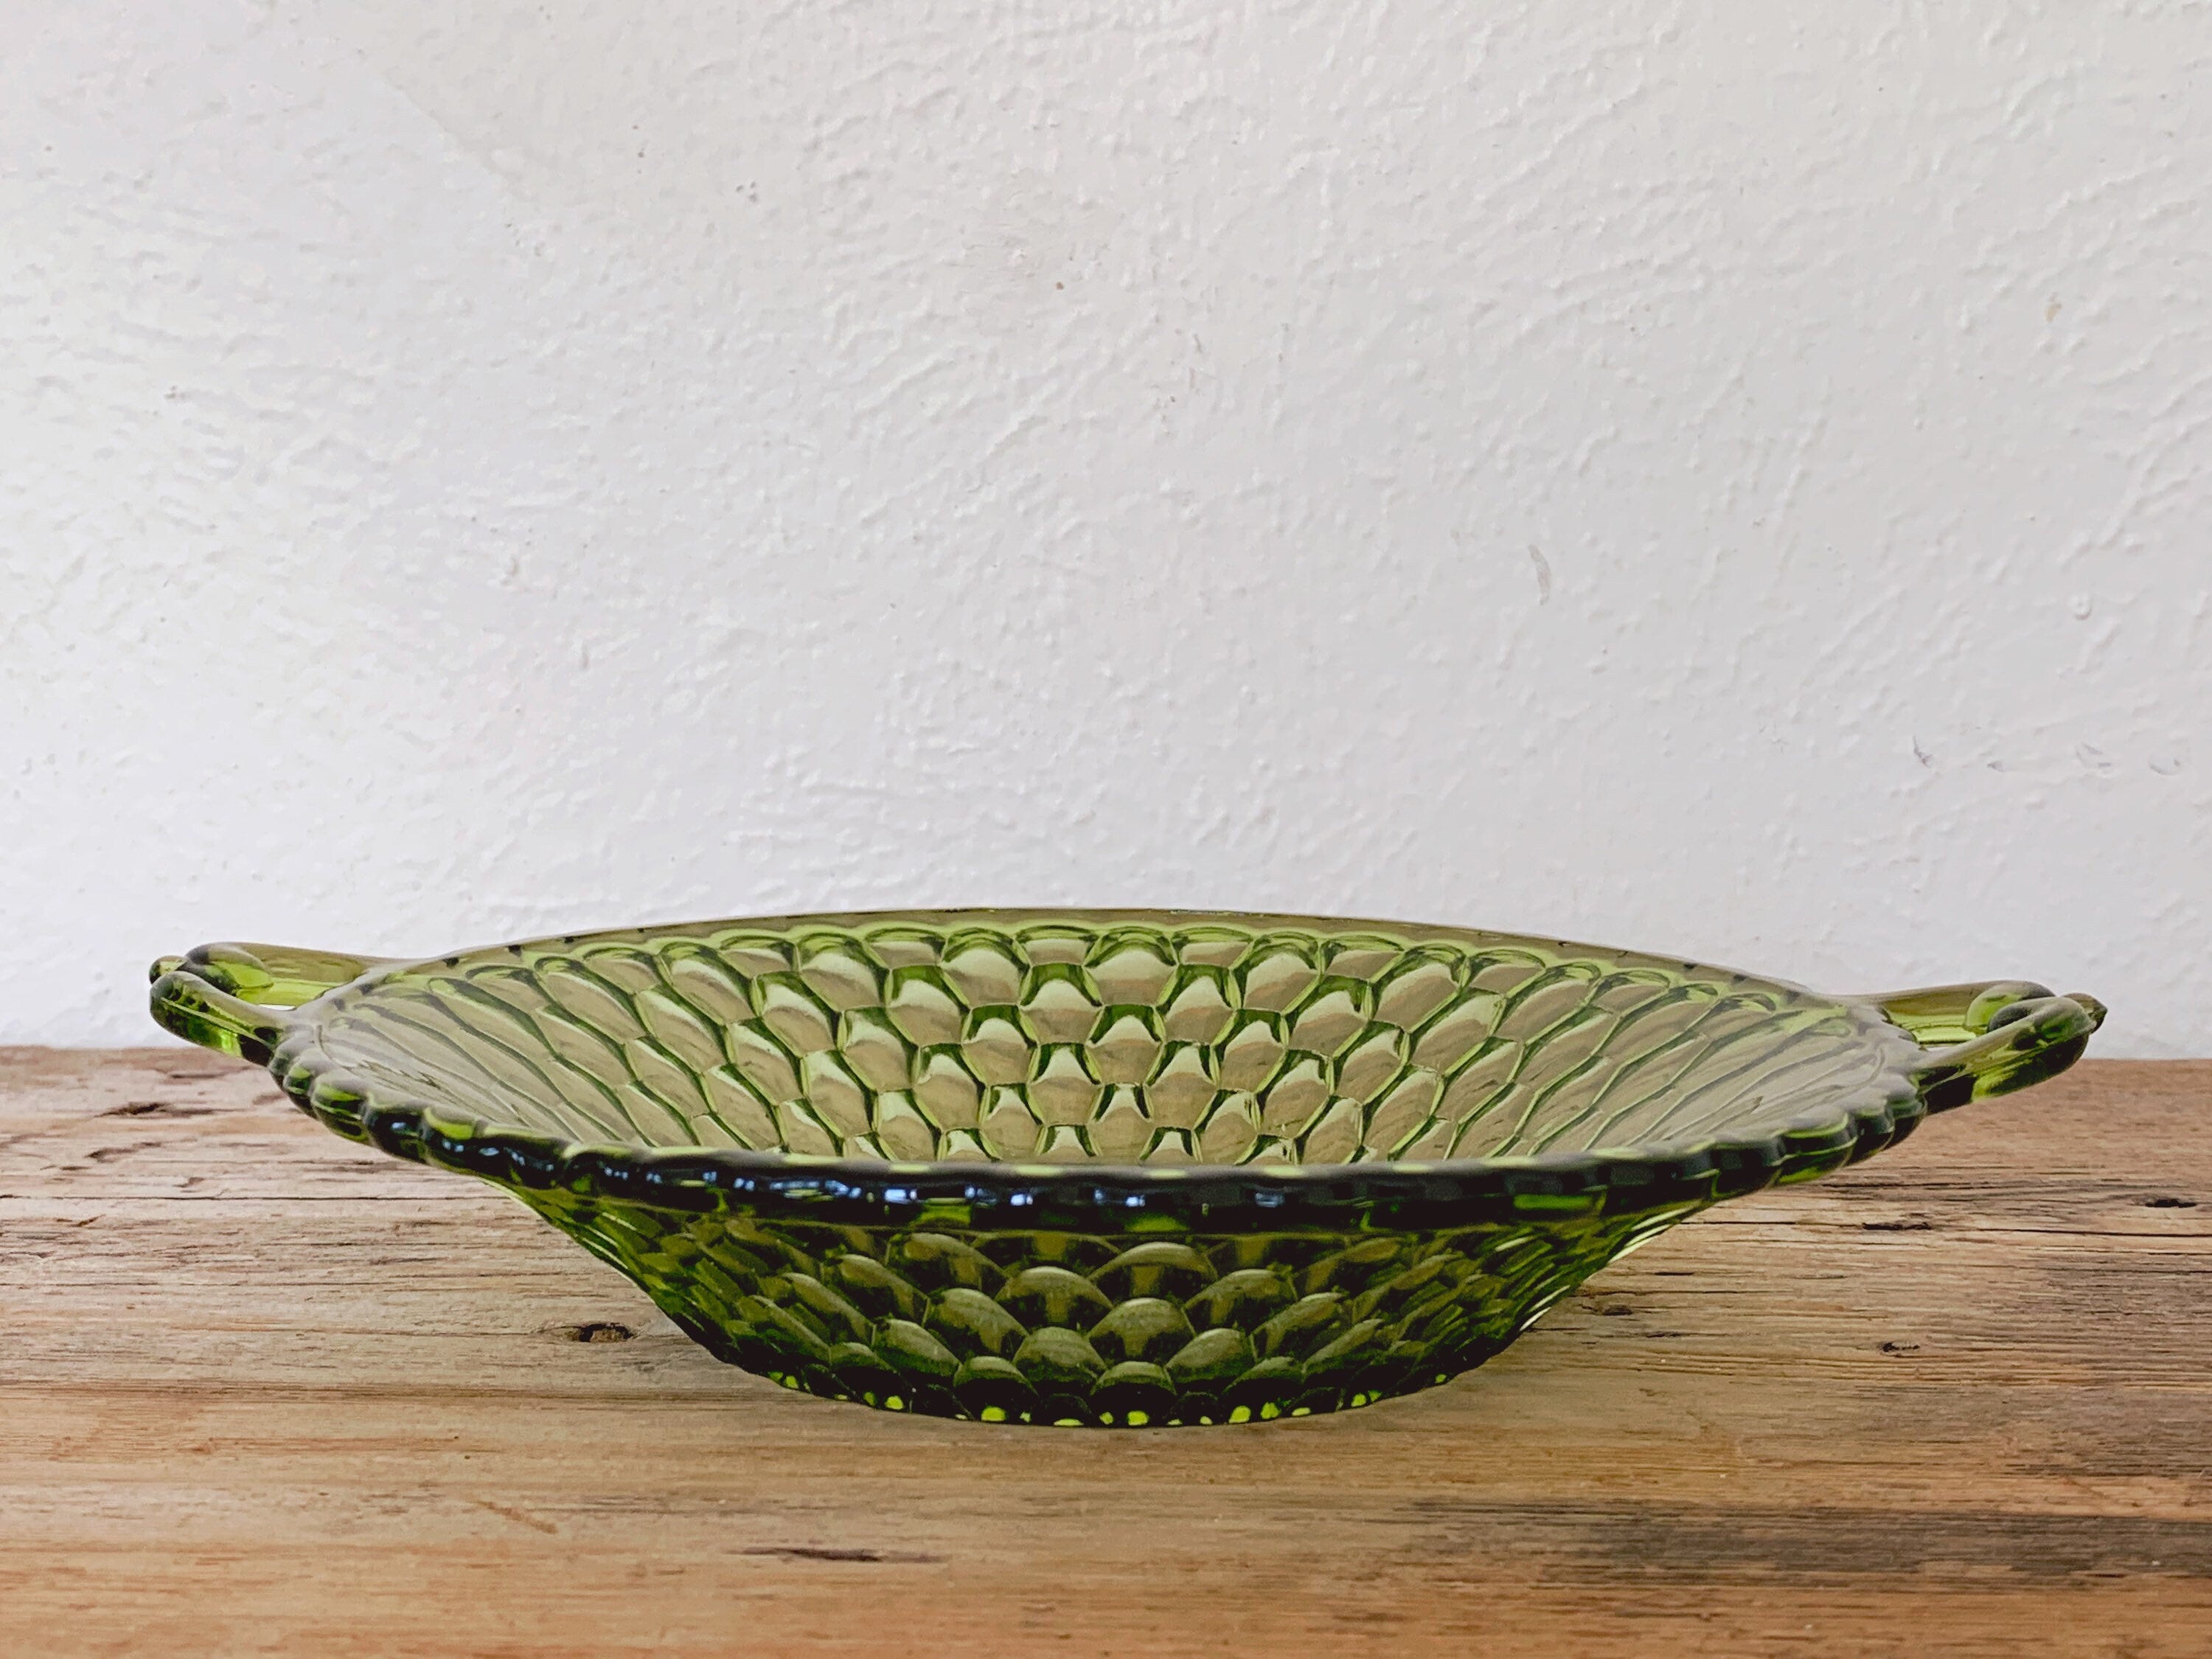 Vintage 1960s Indiana Glass Avocado Green Glass Serving Dish with Double Handles | Mid Century Honeycomb Pattern Jewelry Dish Catchall Bowl